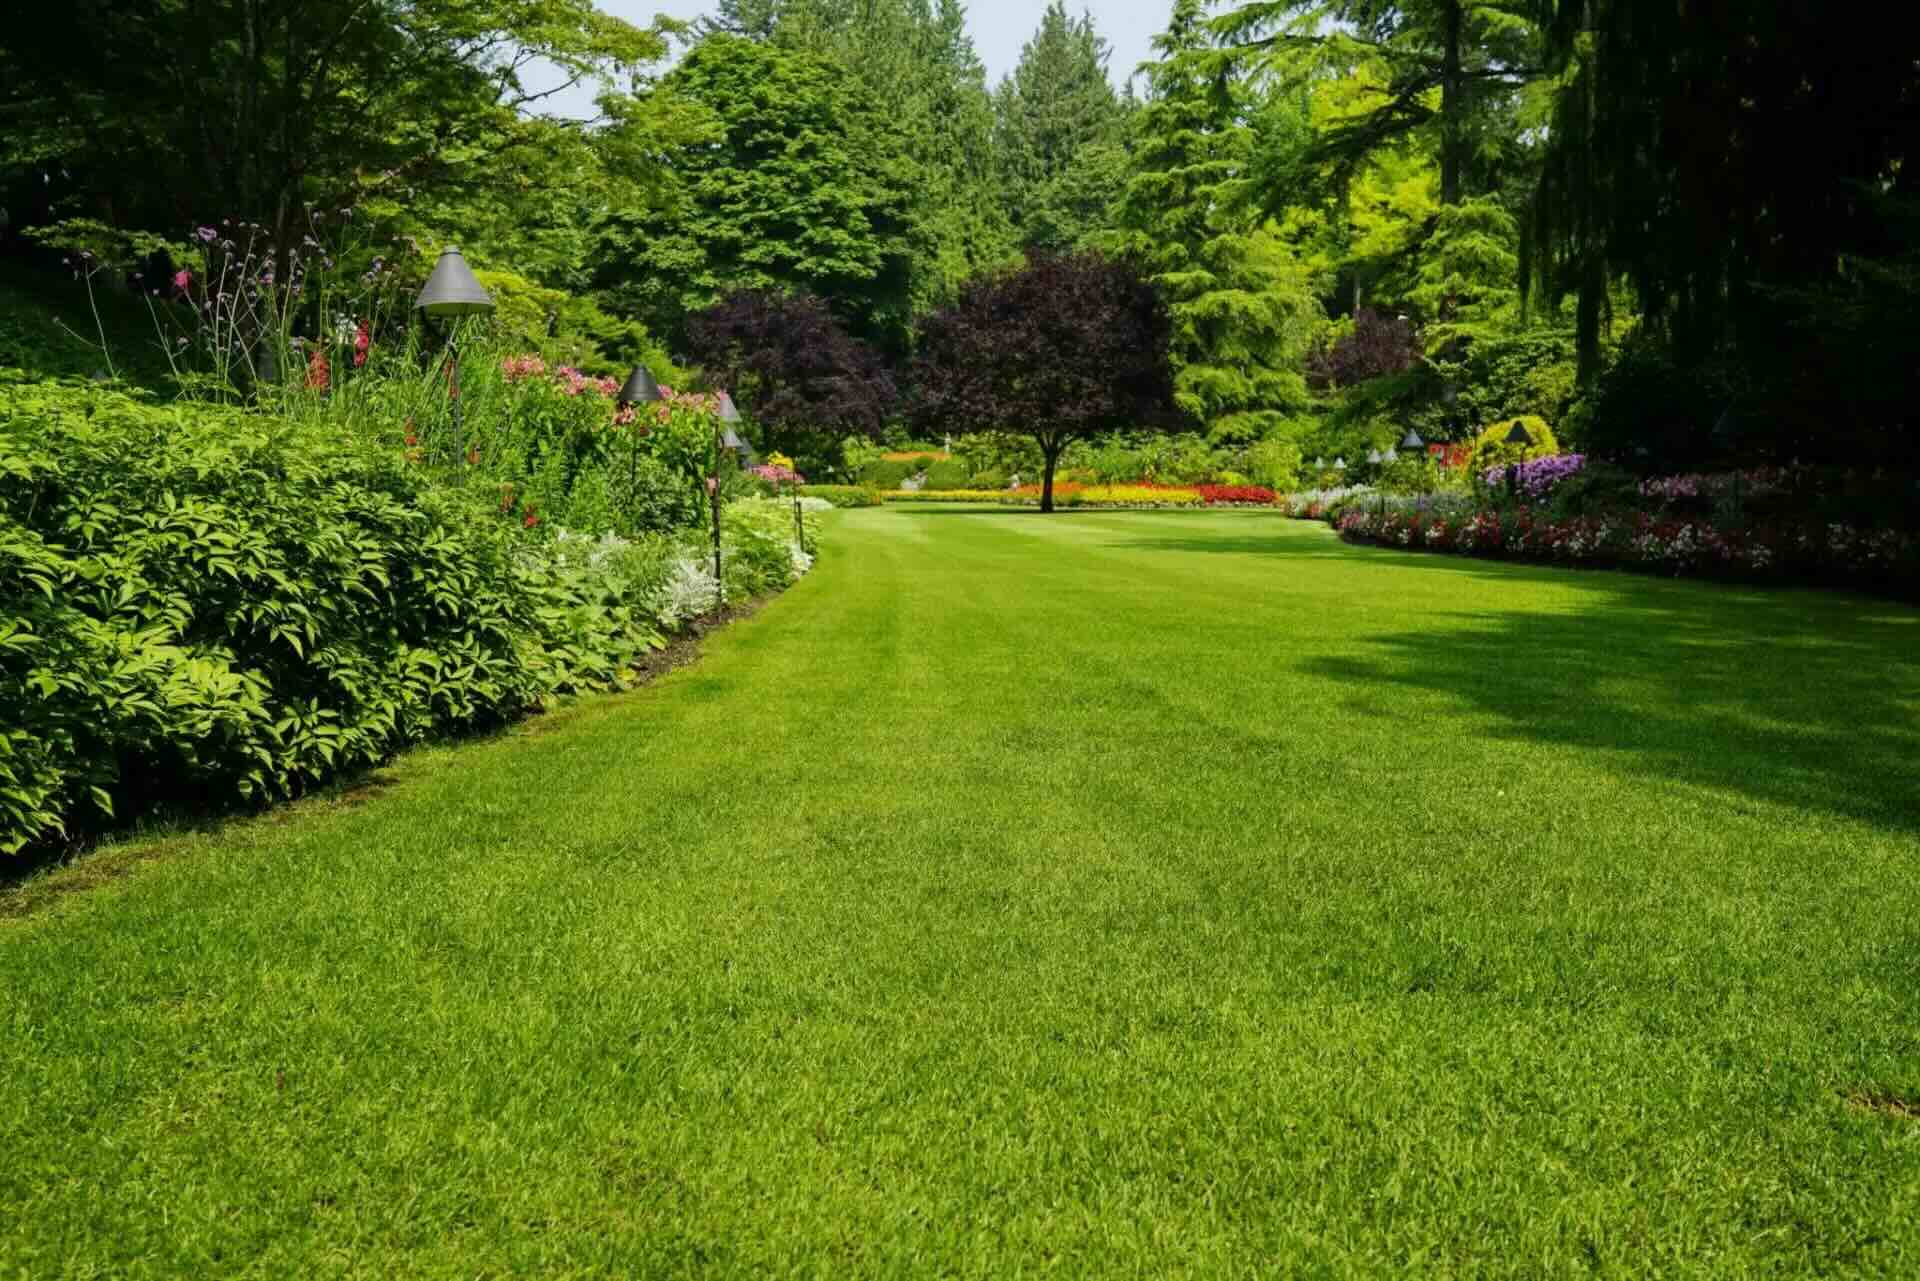 How To Grow Grass In The Summer